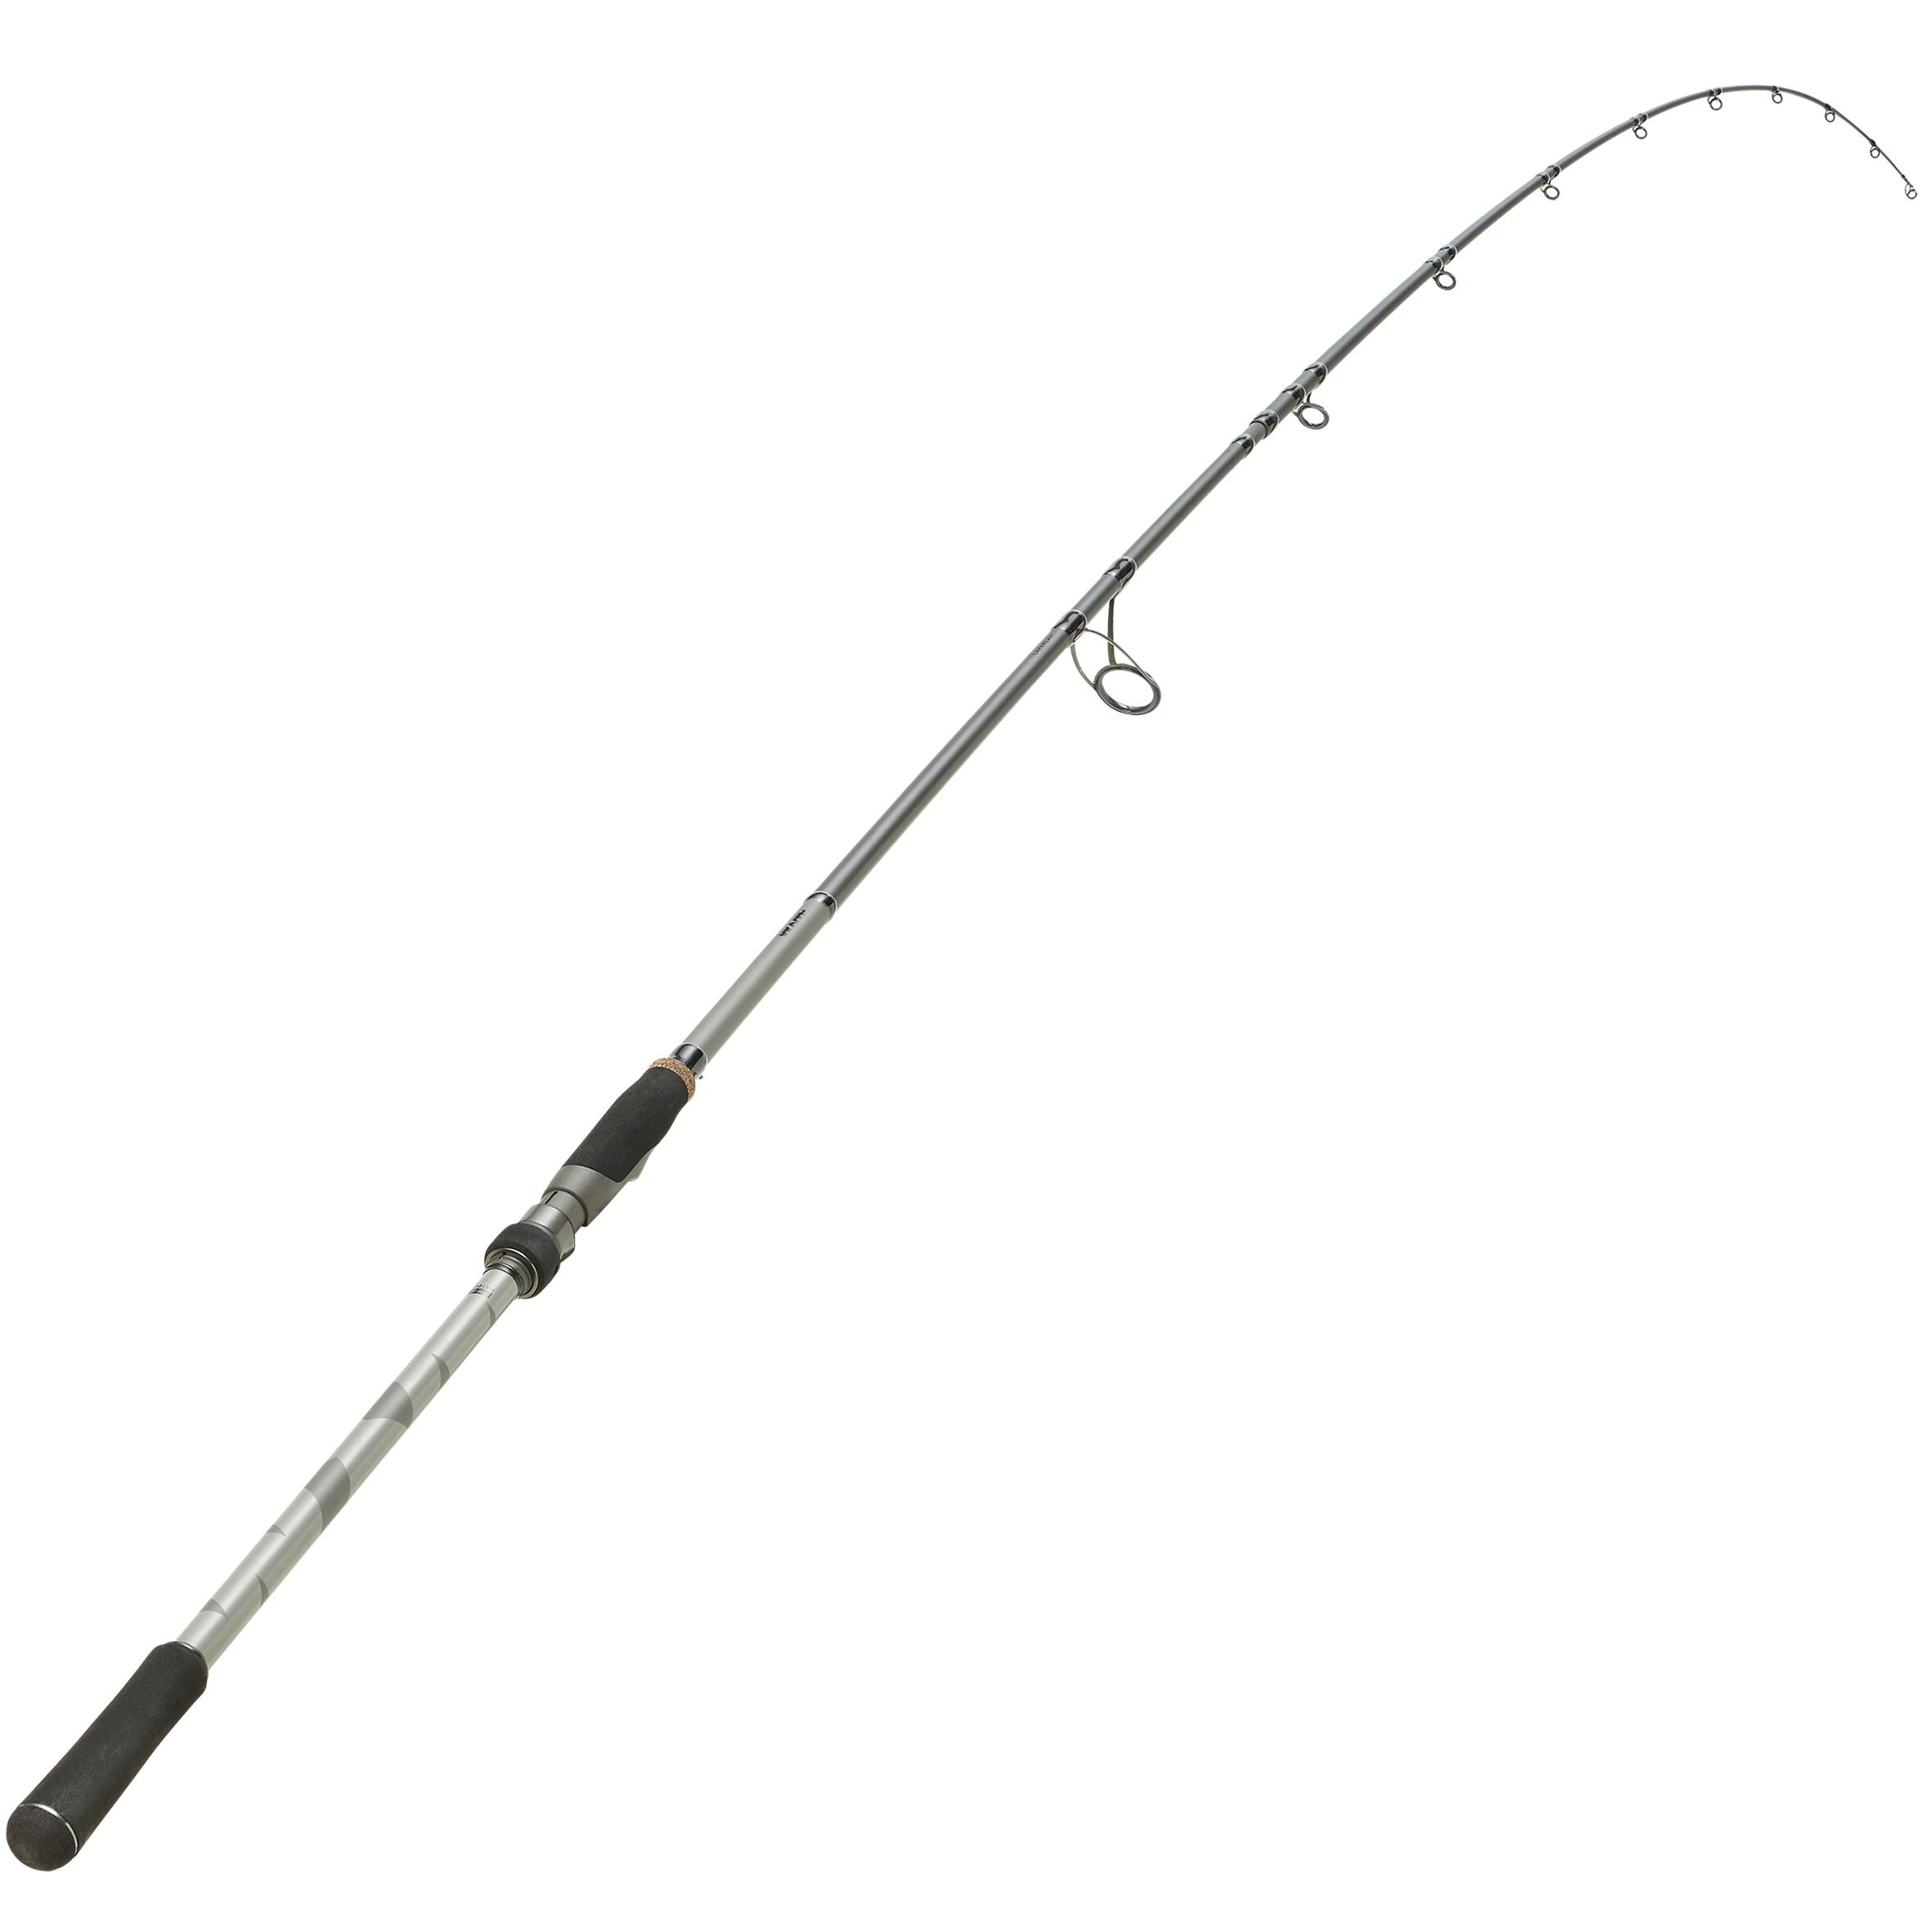 All You Need To Know About a Fishing Rod